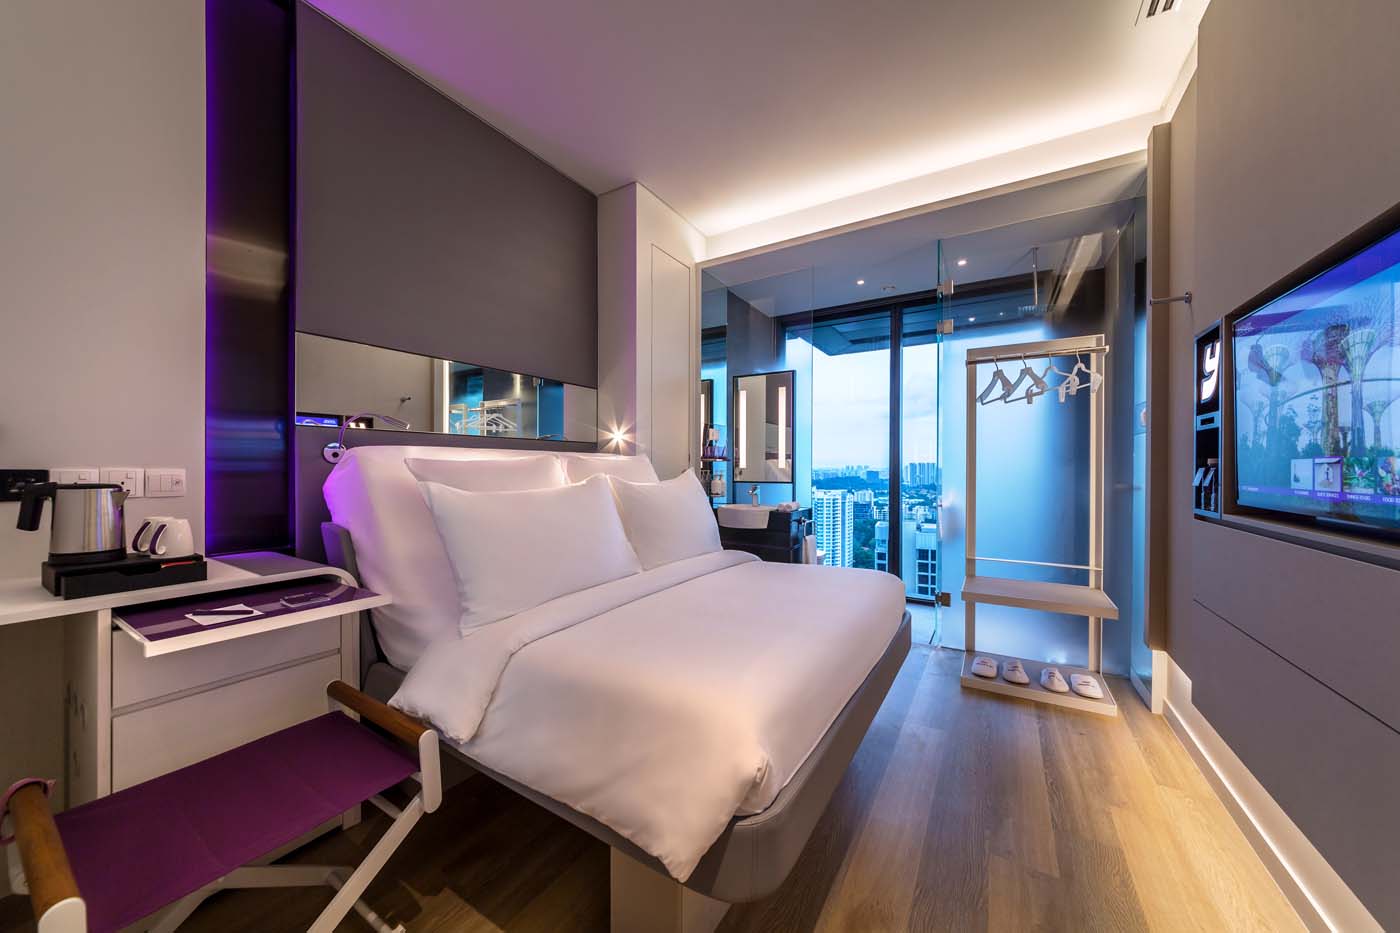 Yotel Singapore Brings First Class Airline Cabins to Micro Hotel Rooms